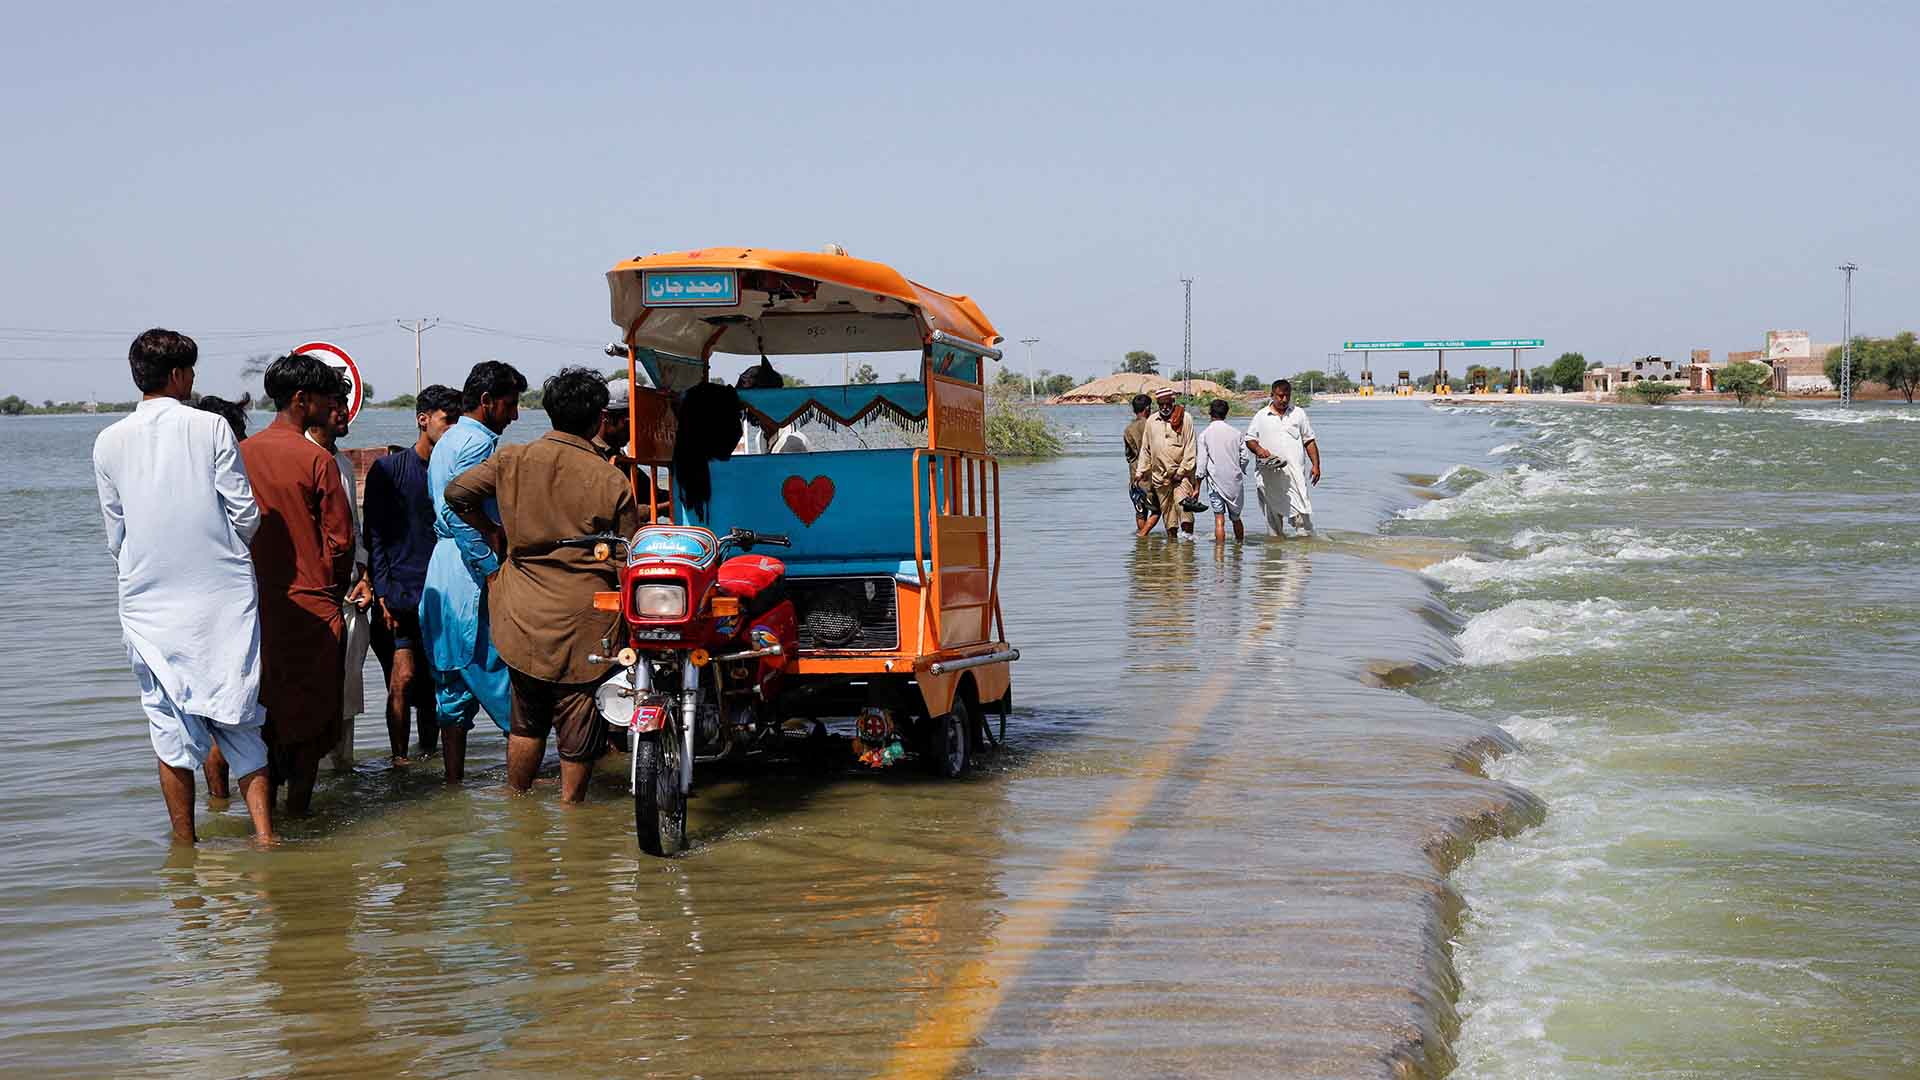 Displaced people stand next to a Tuktuk on flooded highway, following rains and floods during the monsoon season in Sehwan, Pakistan, September 16, 2022.